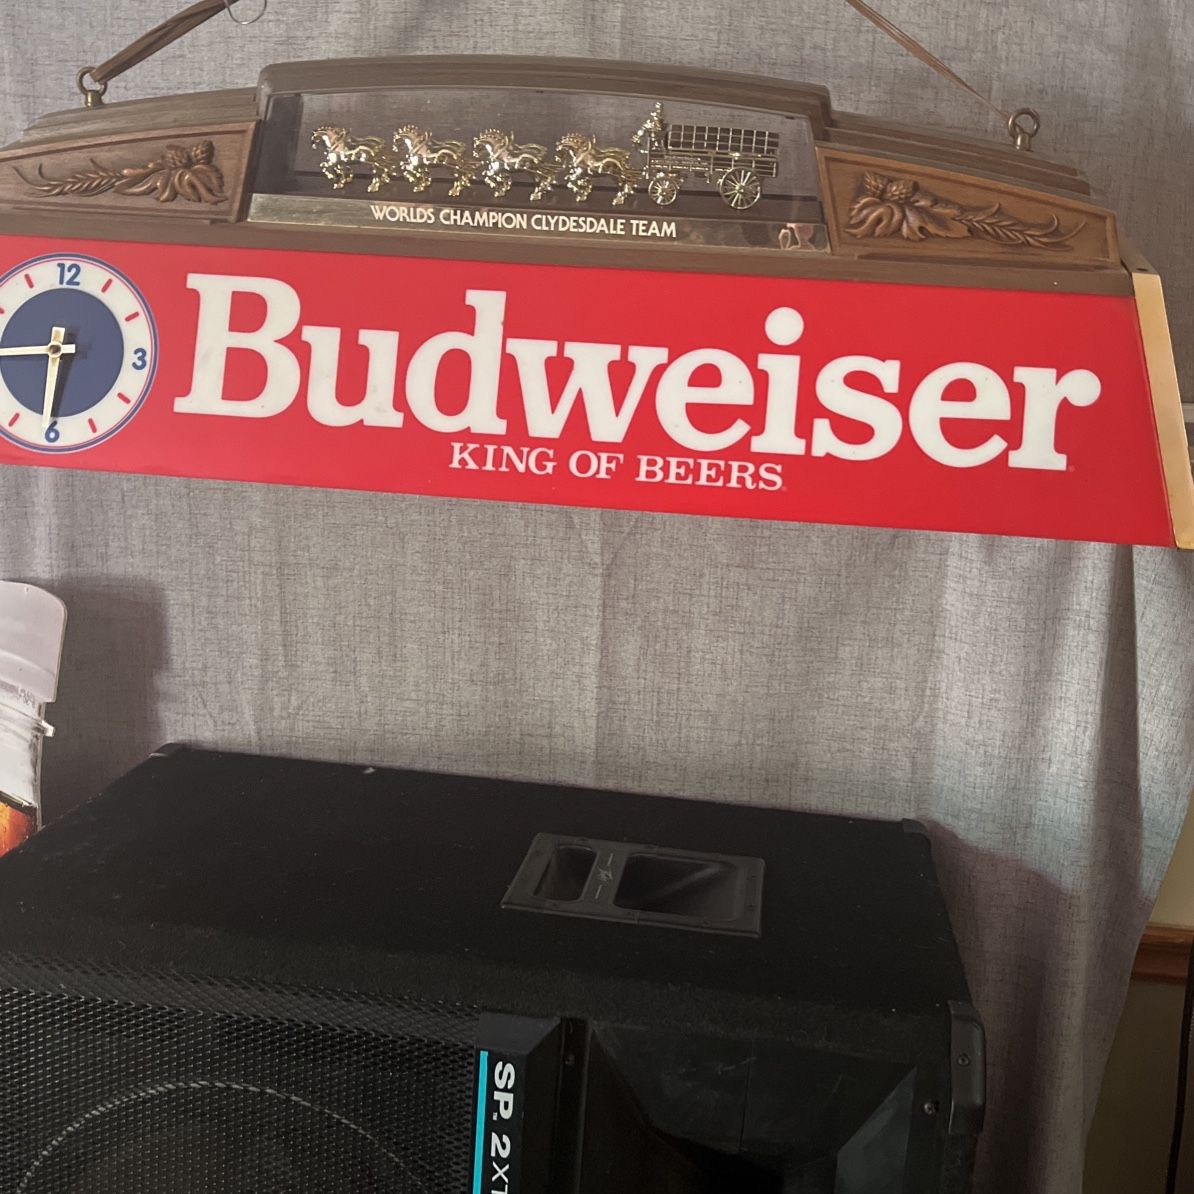 Budweiser King Of Beers, Real Champion, Clydesdale Team Bar, Pool Game Light